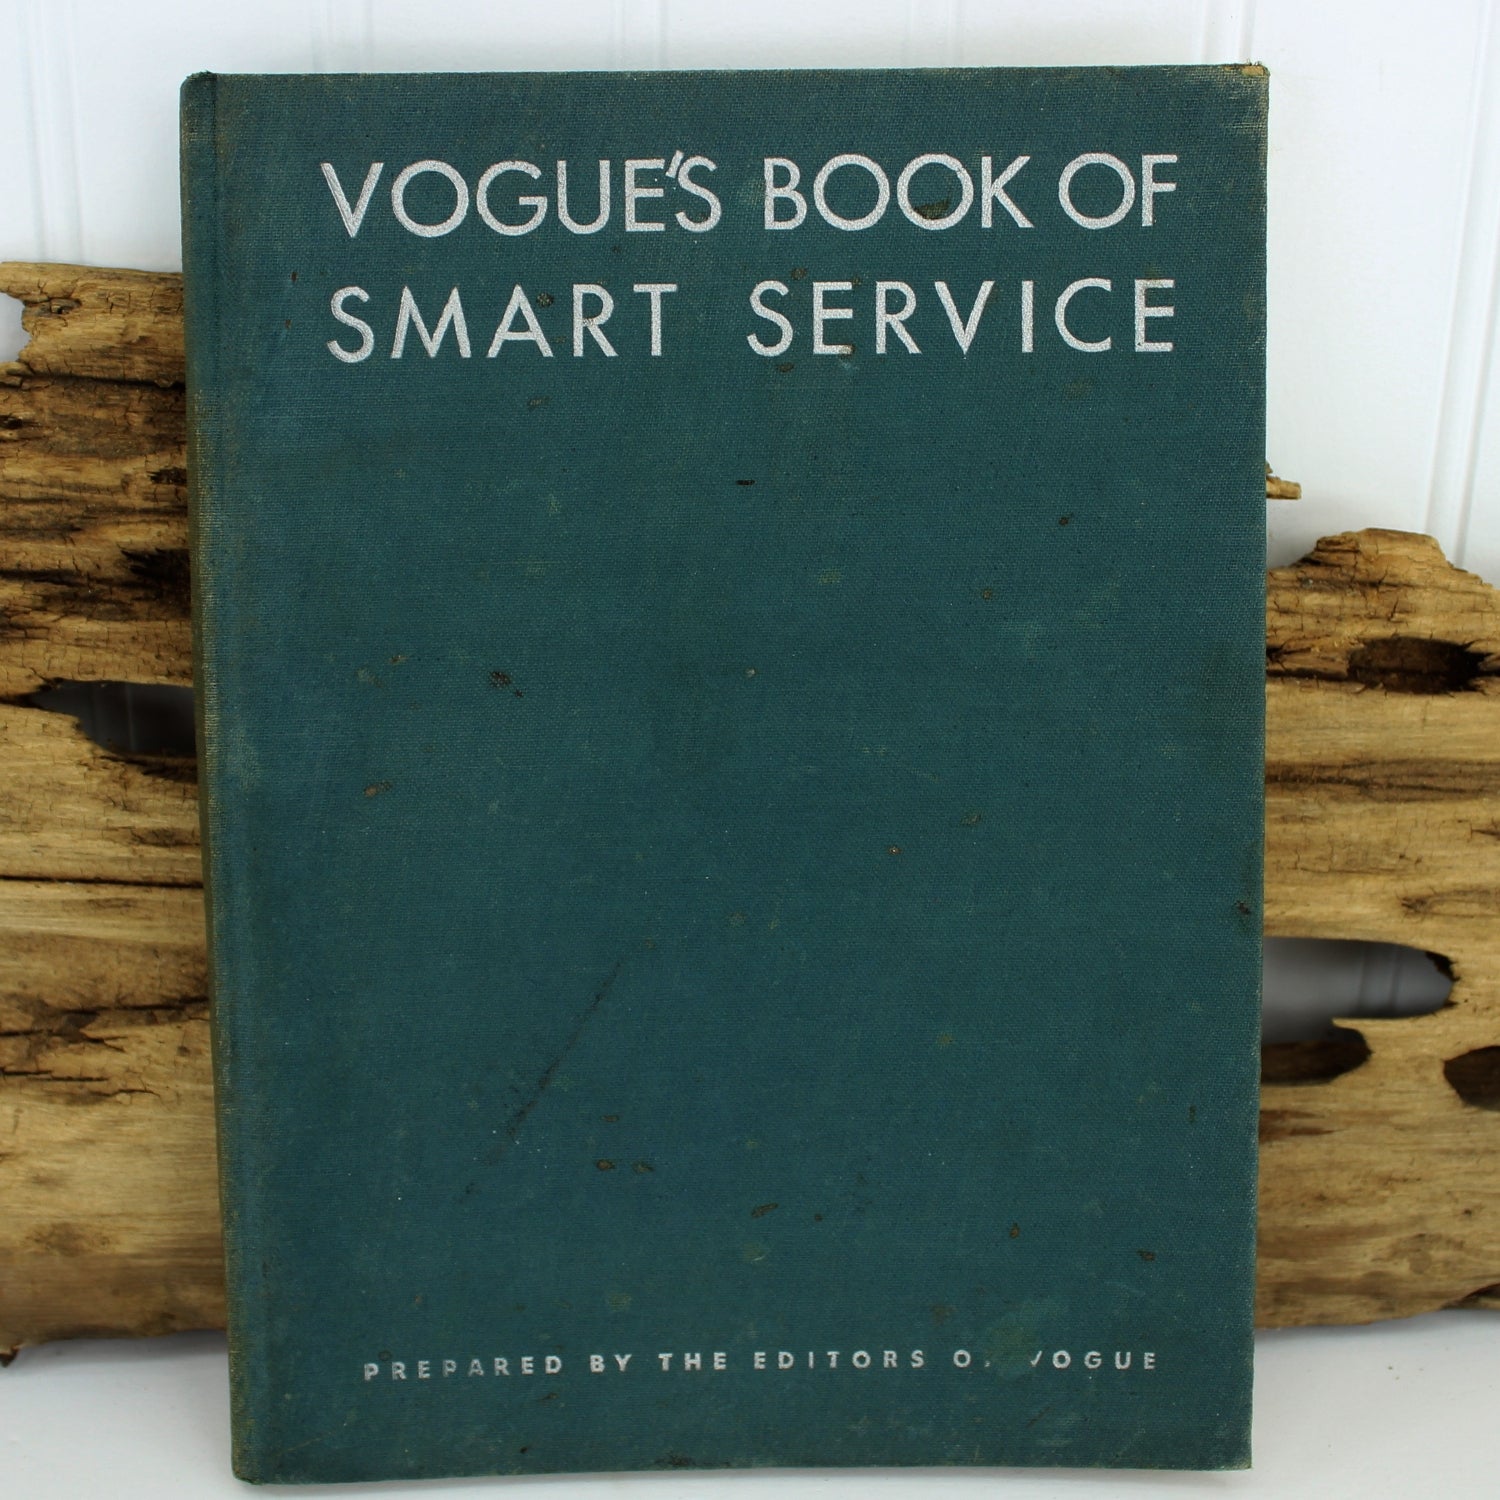 Antique 1930 Conde Nast Vogue's Book of Smart Service Butler Chauffeur Dress Silver Table Service